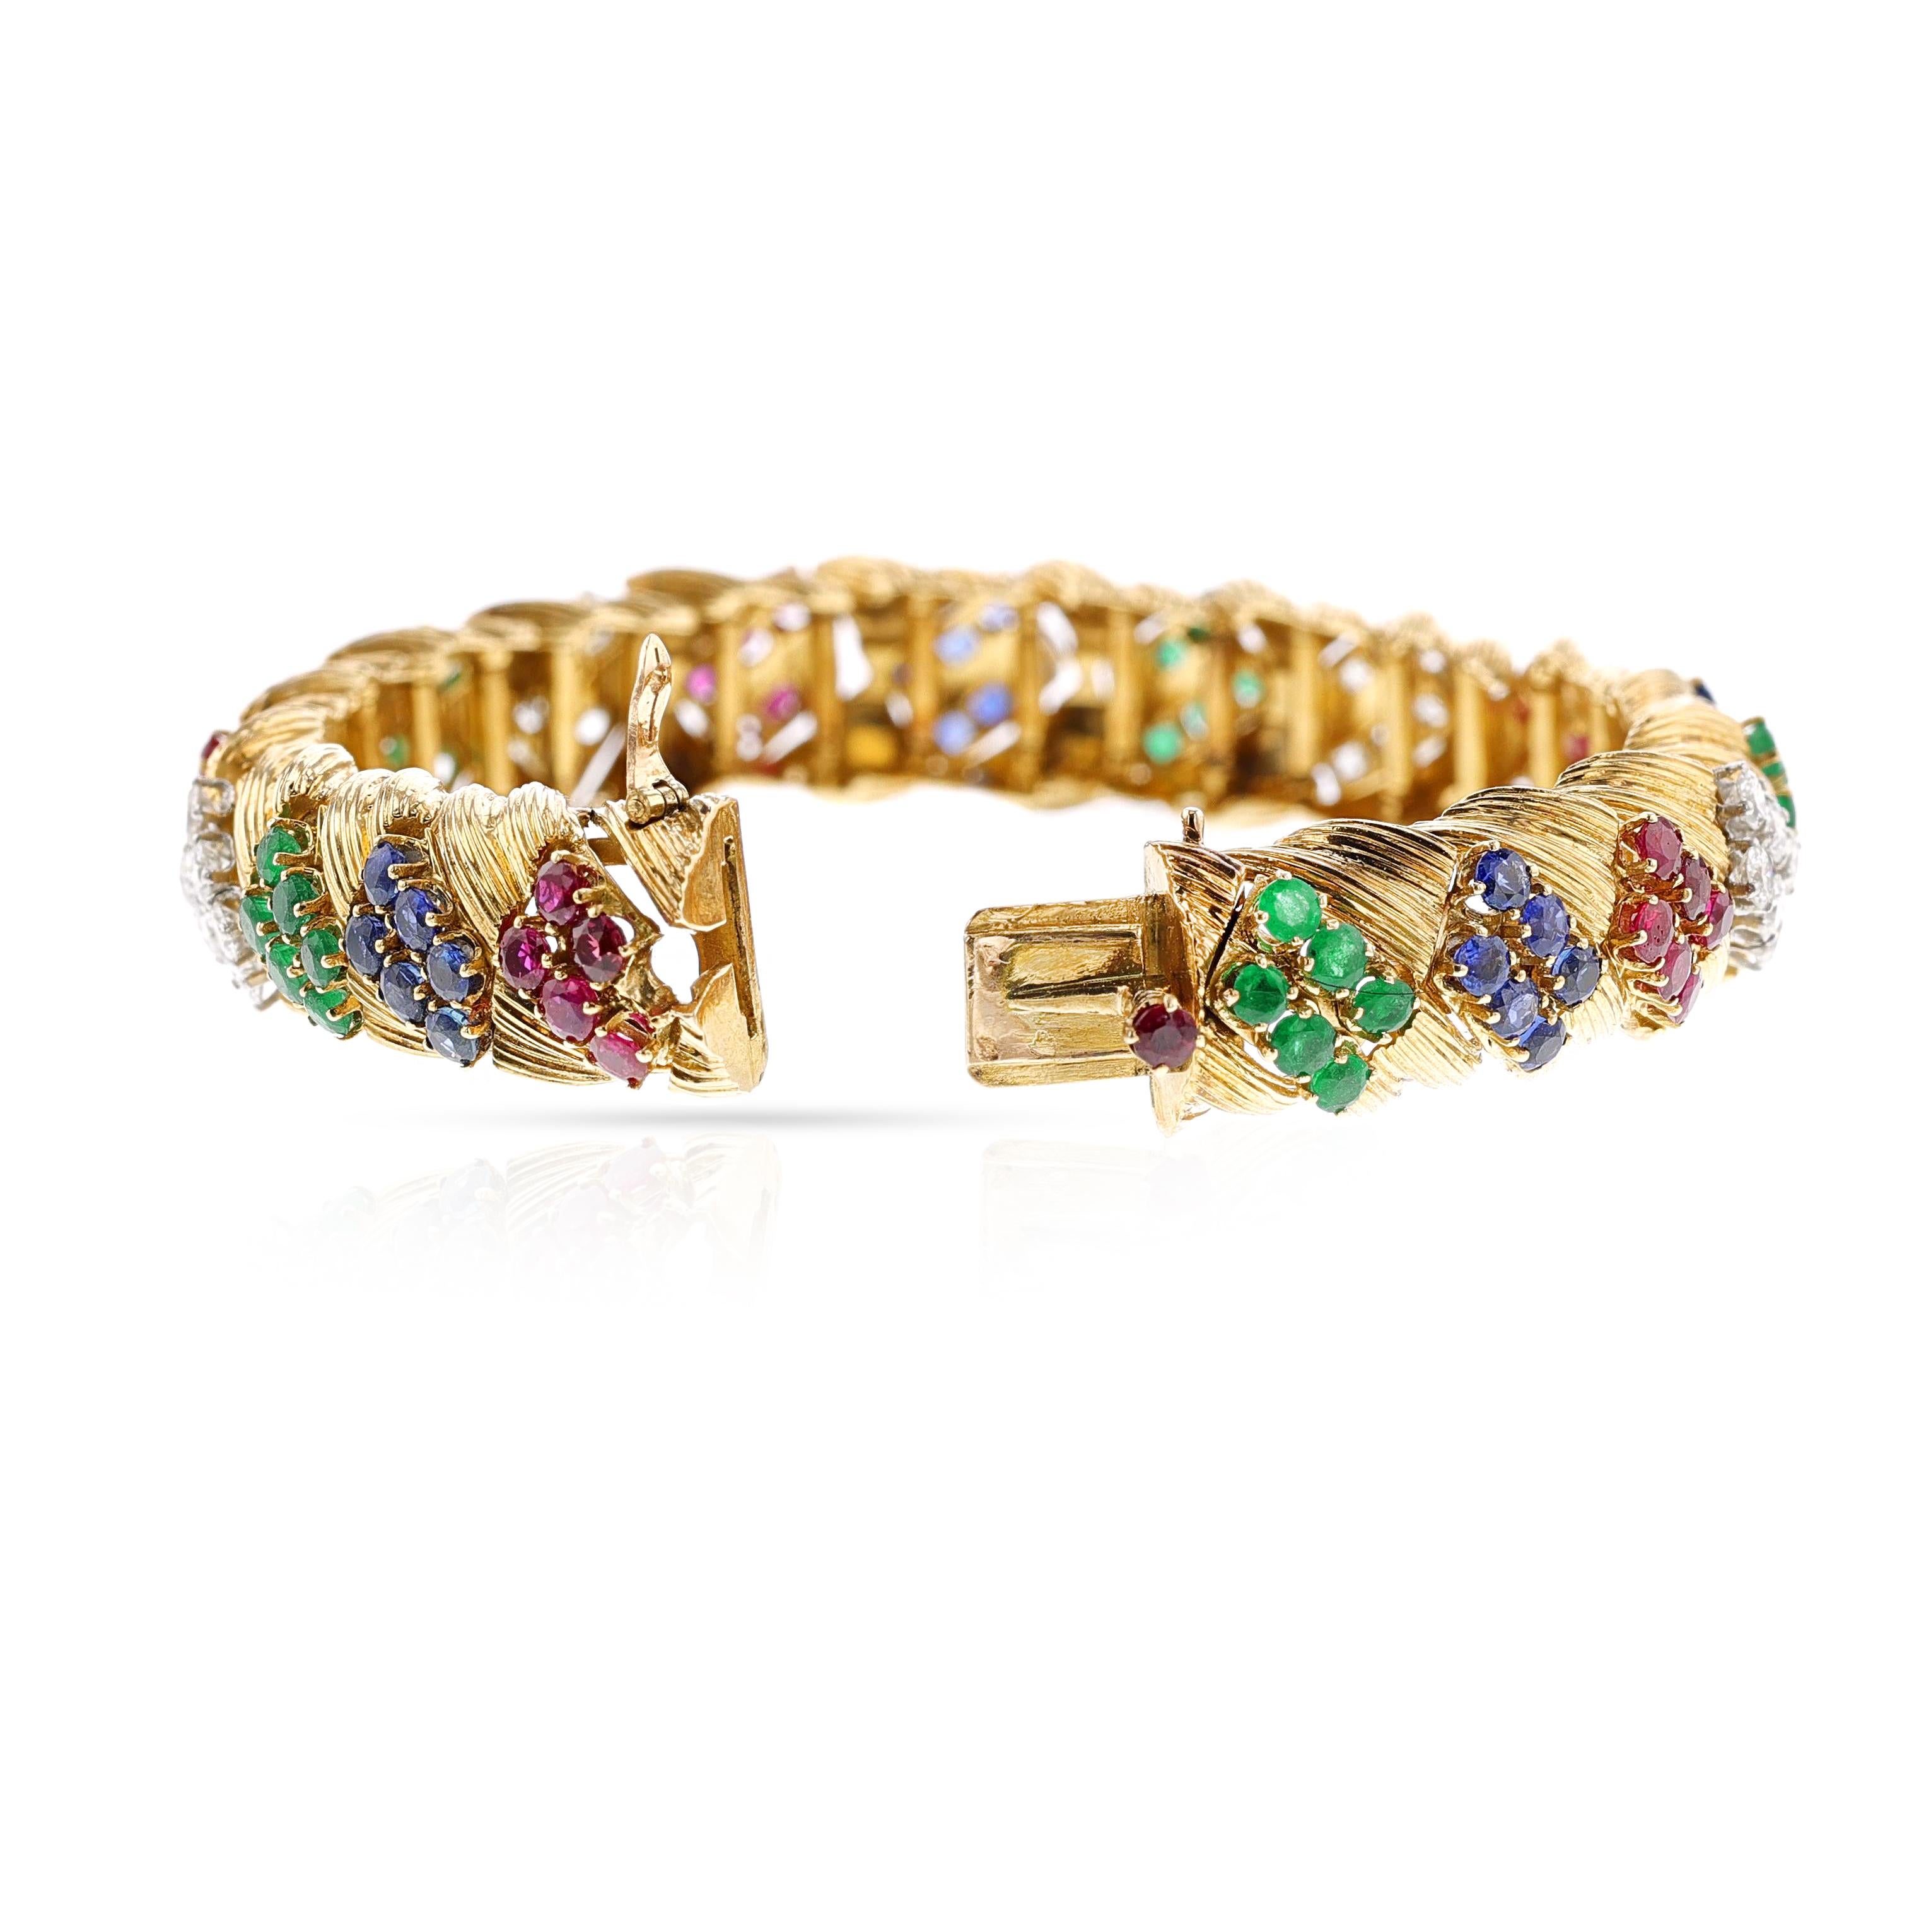 Mauboussin Paris Ruby, Emerald, Sapphire and Diamond Bracelet In Excellent Condition For Sale In New York, NY